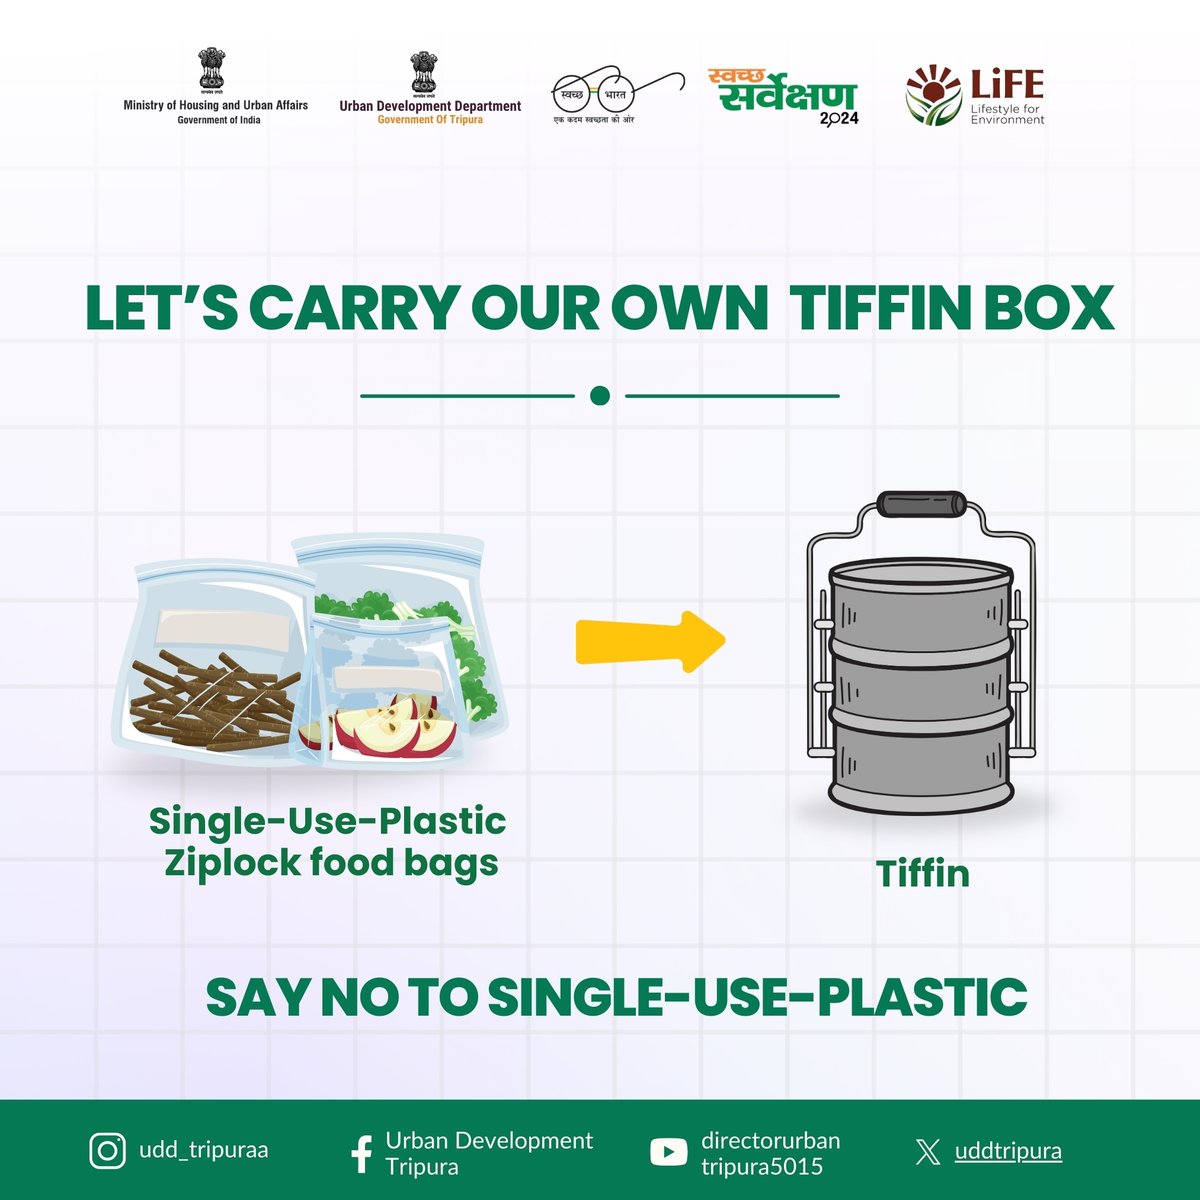 SAY NO TO SINGLE-USE-PLASTIC.
Let's replace Plastic Food Bags with Reusable tiffin bags.
#stopsingleuseplastic #Sustainability  #cleantripura #sustainabletripura #swachhbharat  #sbm